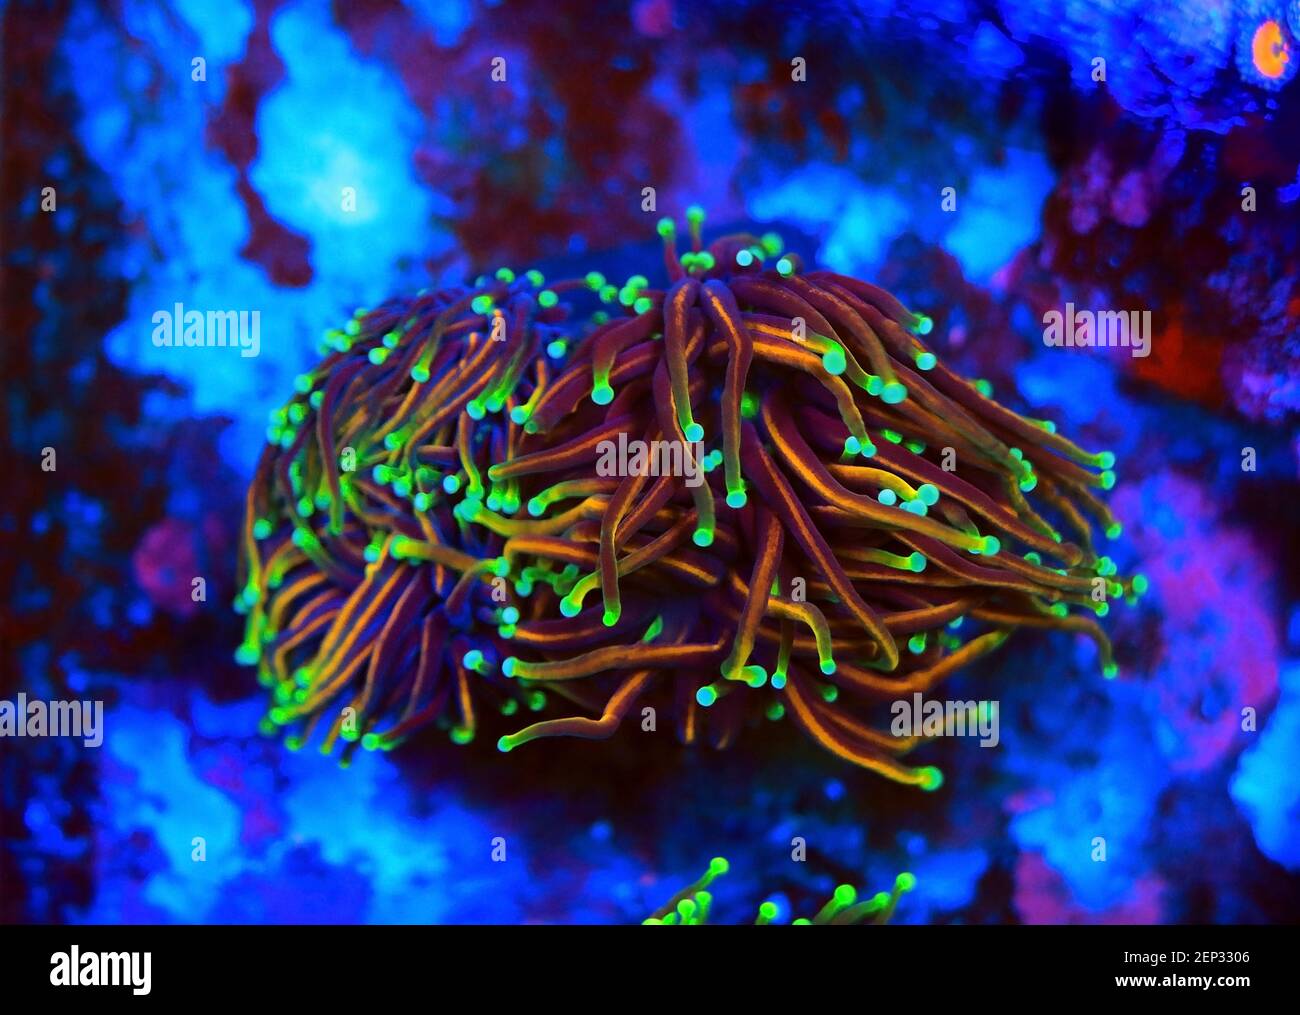 Euphyllia Torch is one of the most beautiful addition for coral reef aquarium tank Stock Photo